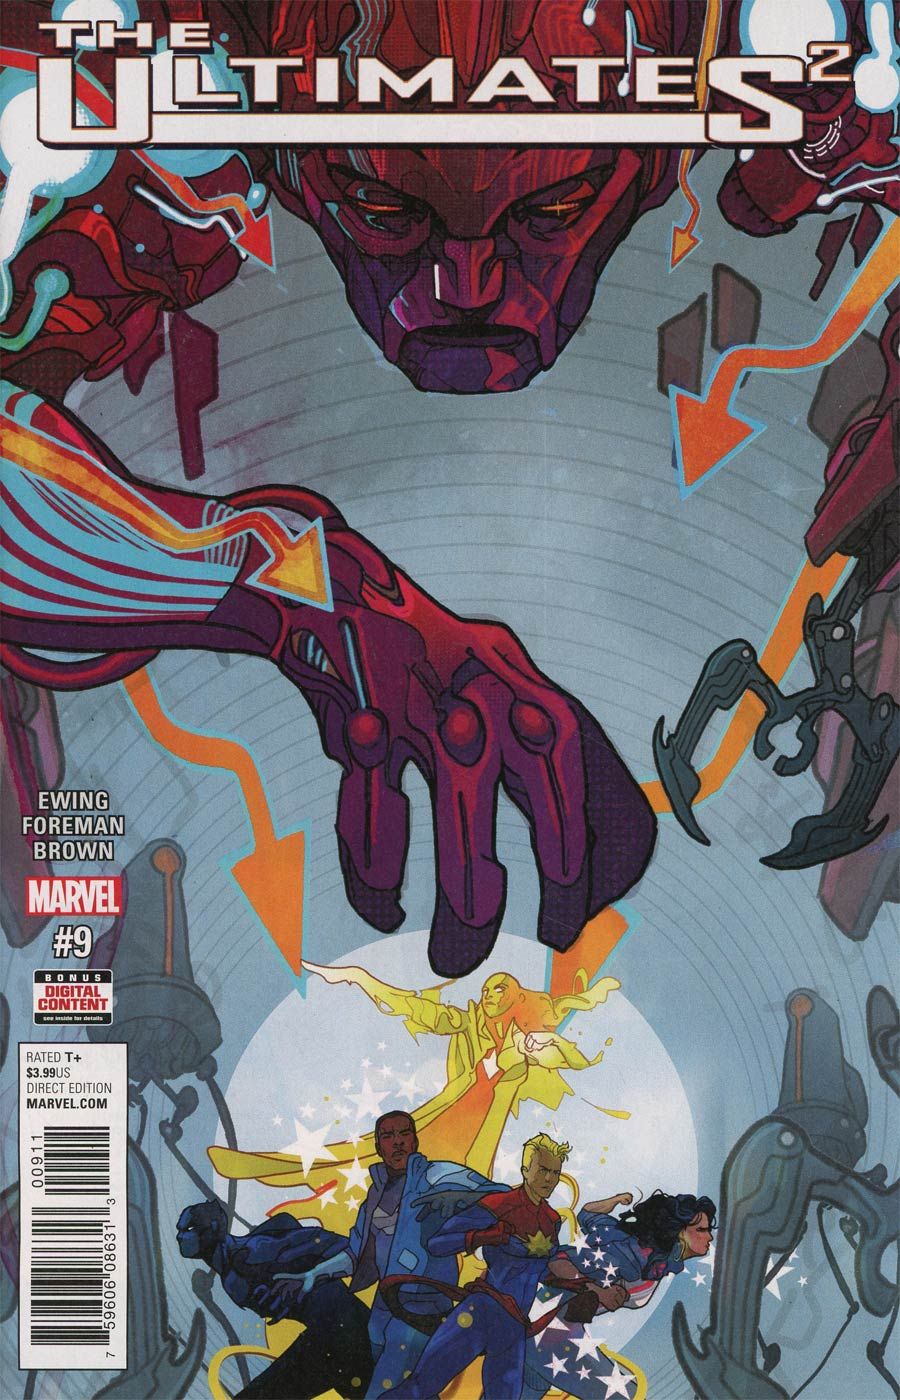 The Ultimates^2 #9